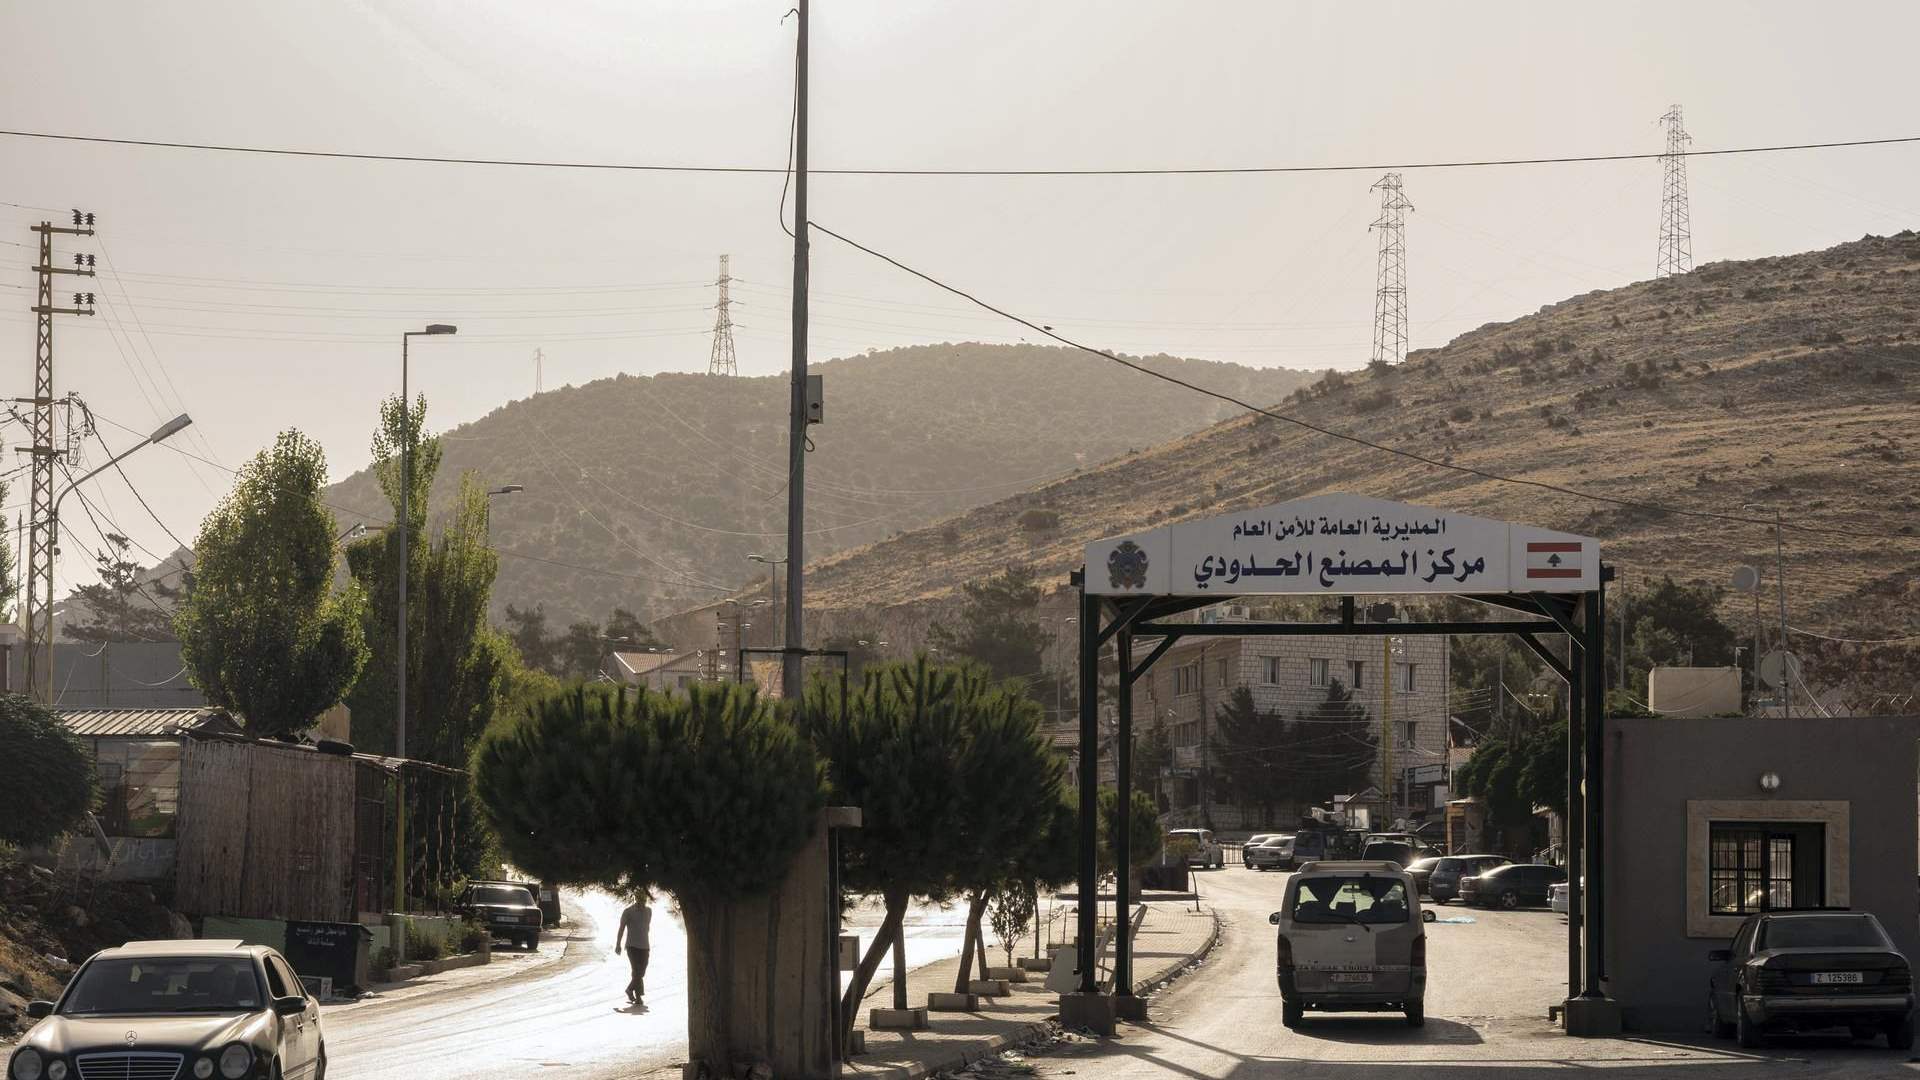 For About $100, Syrians Can Illegally Cross the Lebanese-Syrian Border 